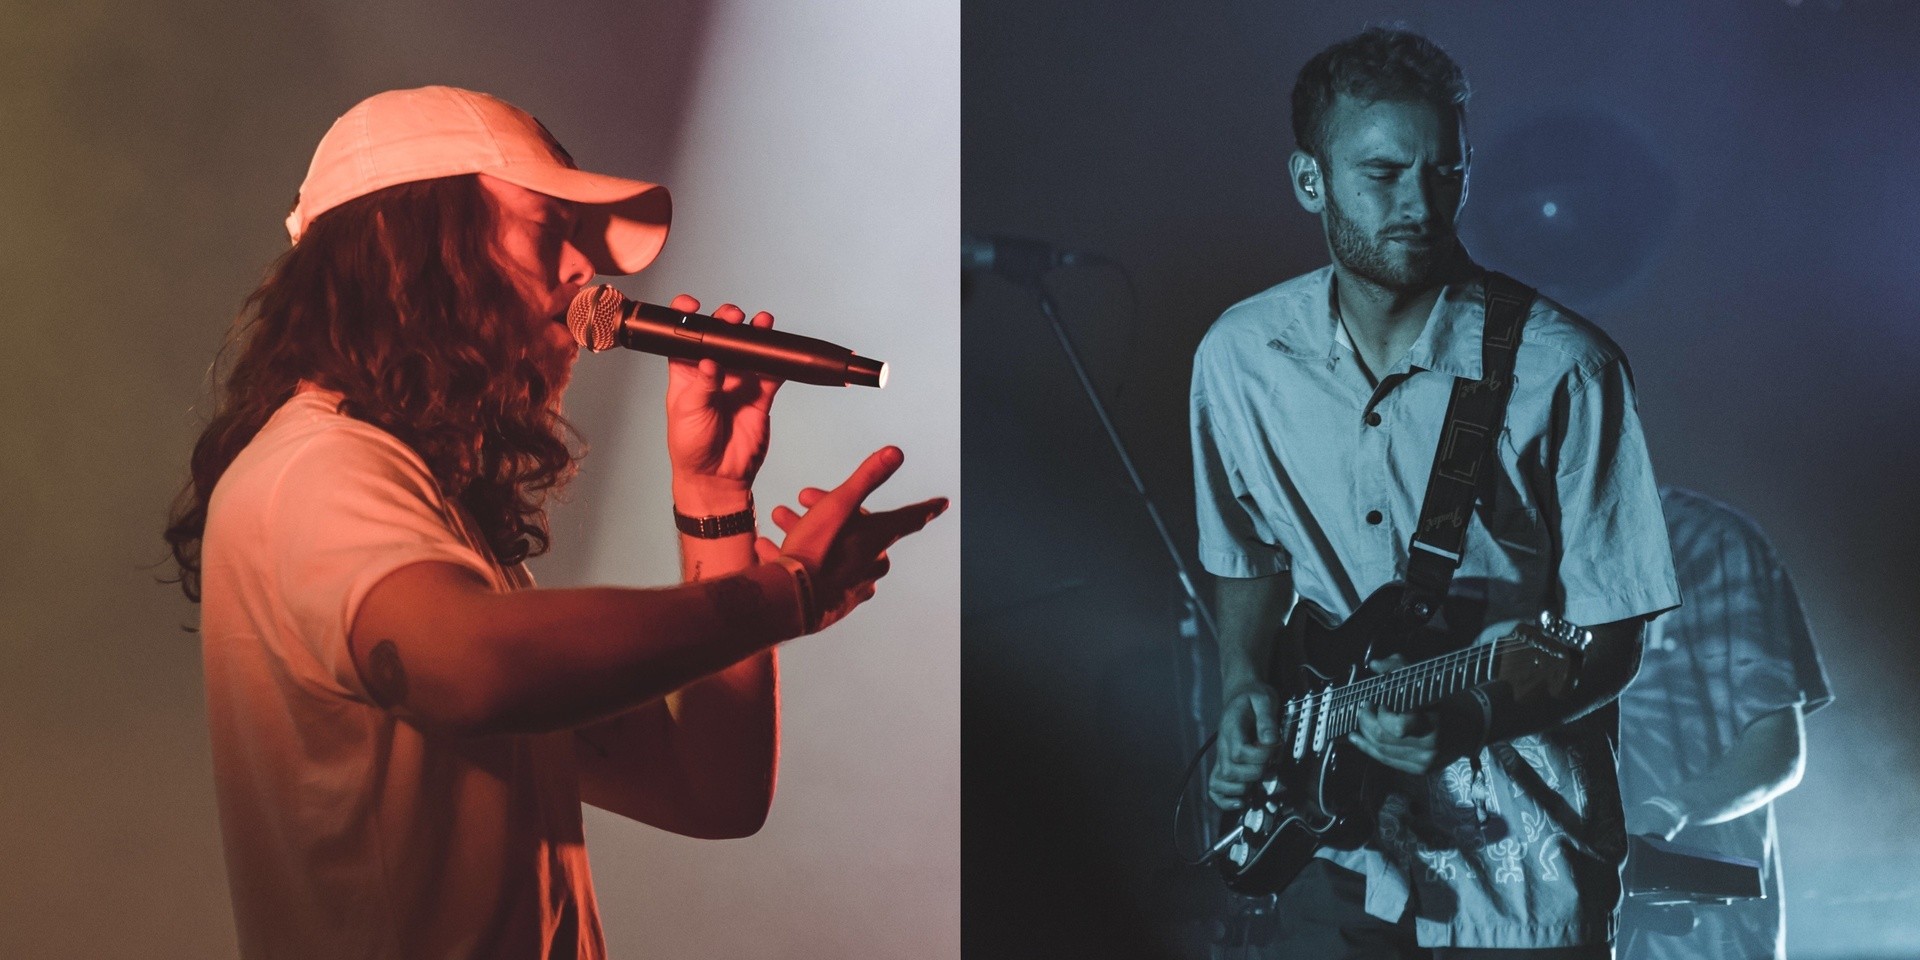 Tom Misch and Vancouver Sleep Clinic win fans over at Karpos Live Mix 2.1